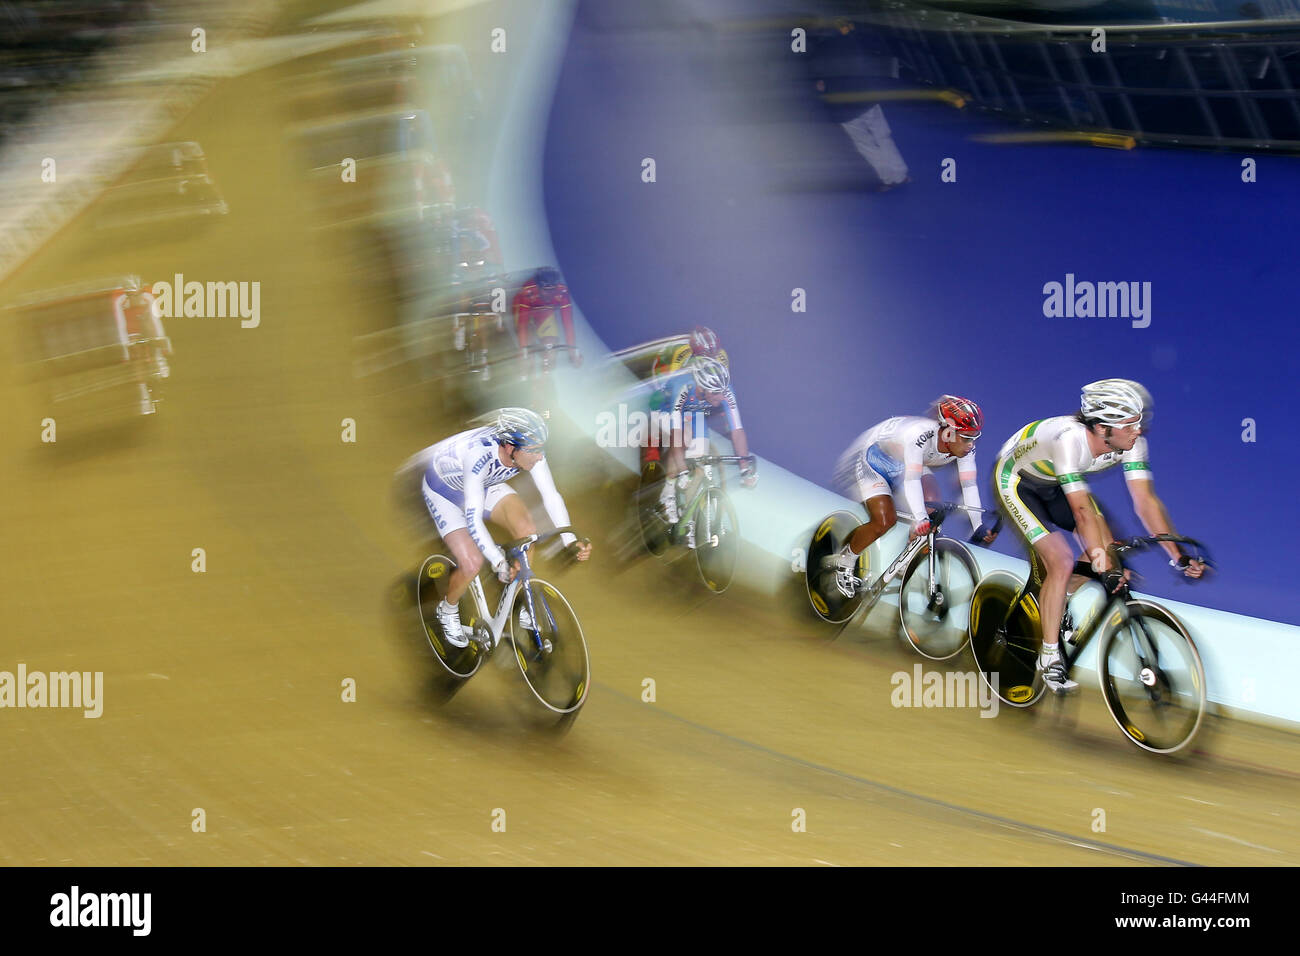 Cycling - Track World Cup - Day One - National Cycling Centre. Riders during the Men's Individual Pursuit Stock Photo